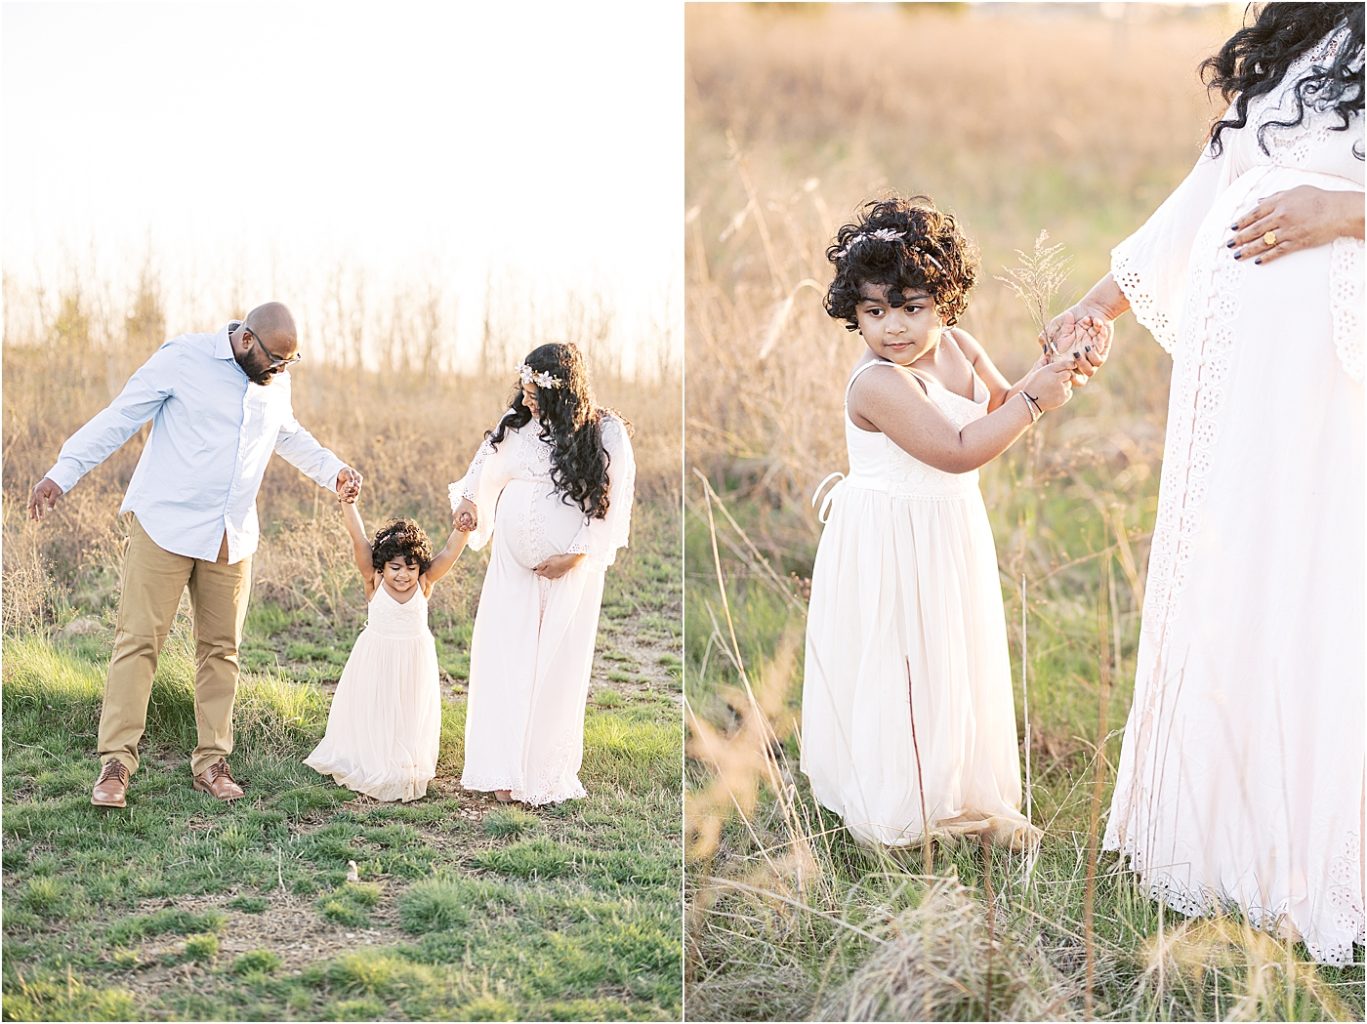 Outdoor maternity session with Mom, Dad and toddler daughter. Photo by Lindsay Konopa Photography.